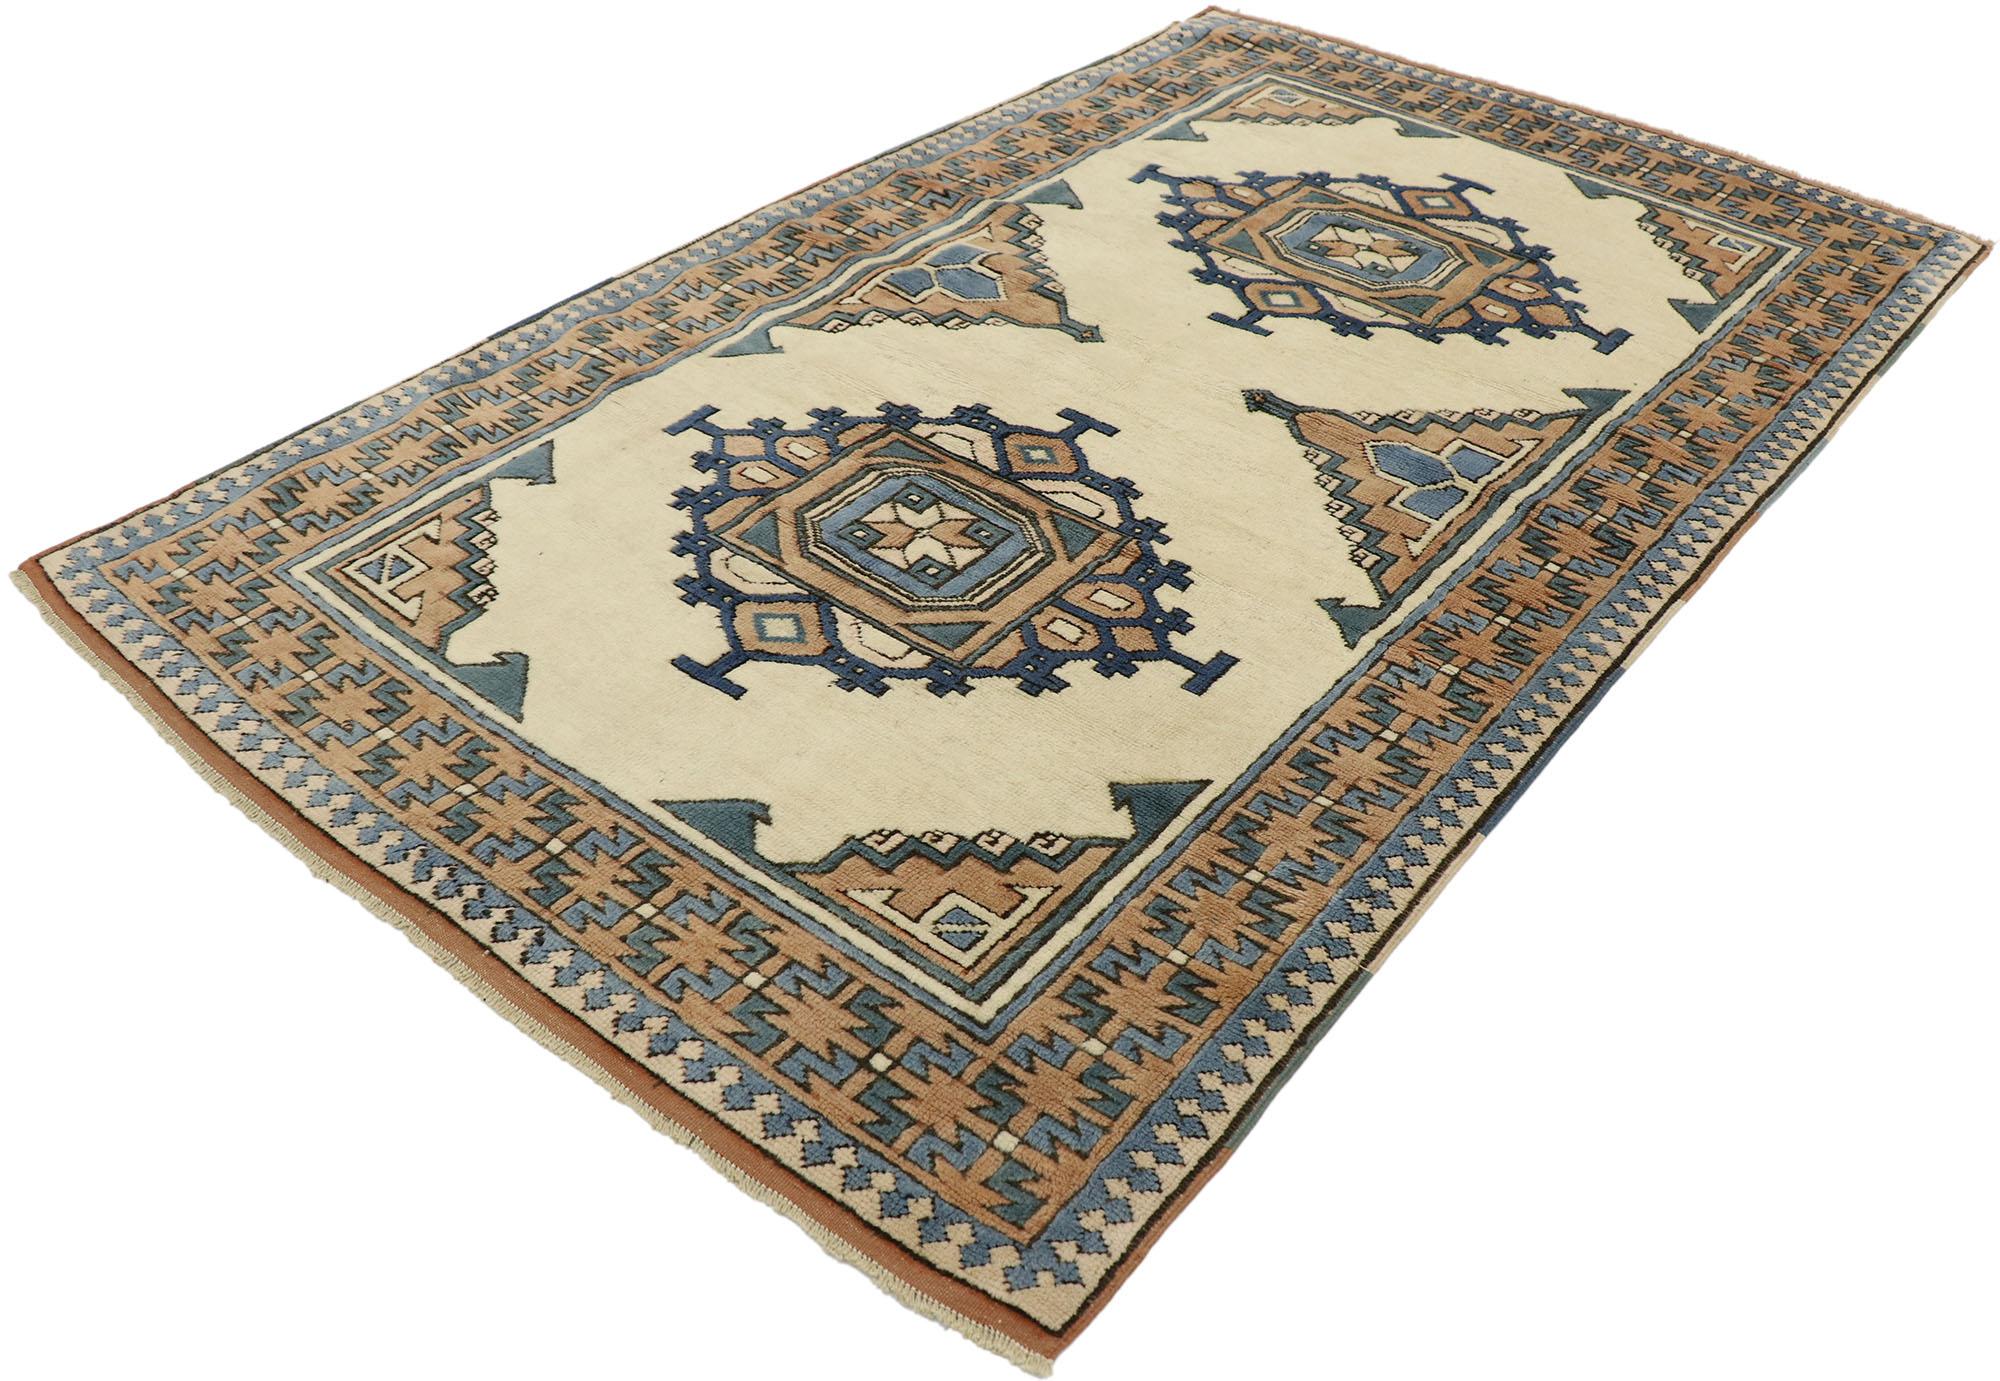 53186, vintage Turkish Oushak rug with Mid-Century Modern Tribal style. Imbued with Caucasian influence and earthy-inspired colors, this hand knotted wool vintage Turkish Oushak rug balances traditional sensibility and tribal style. The abrashed